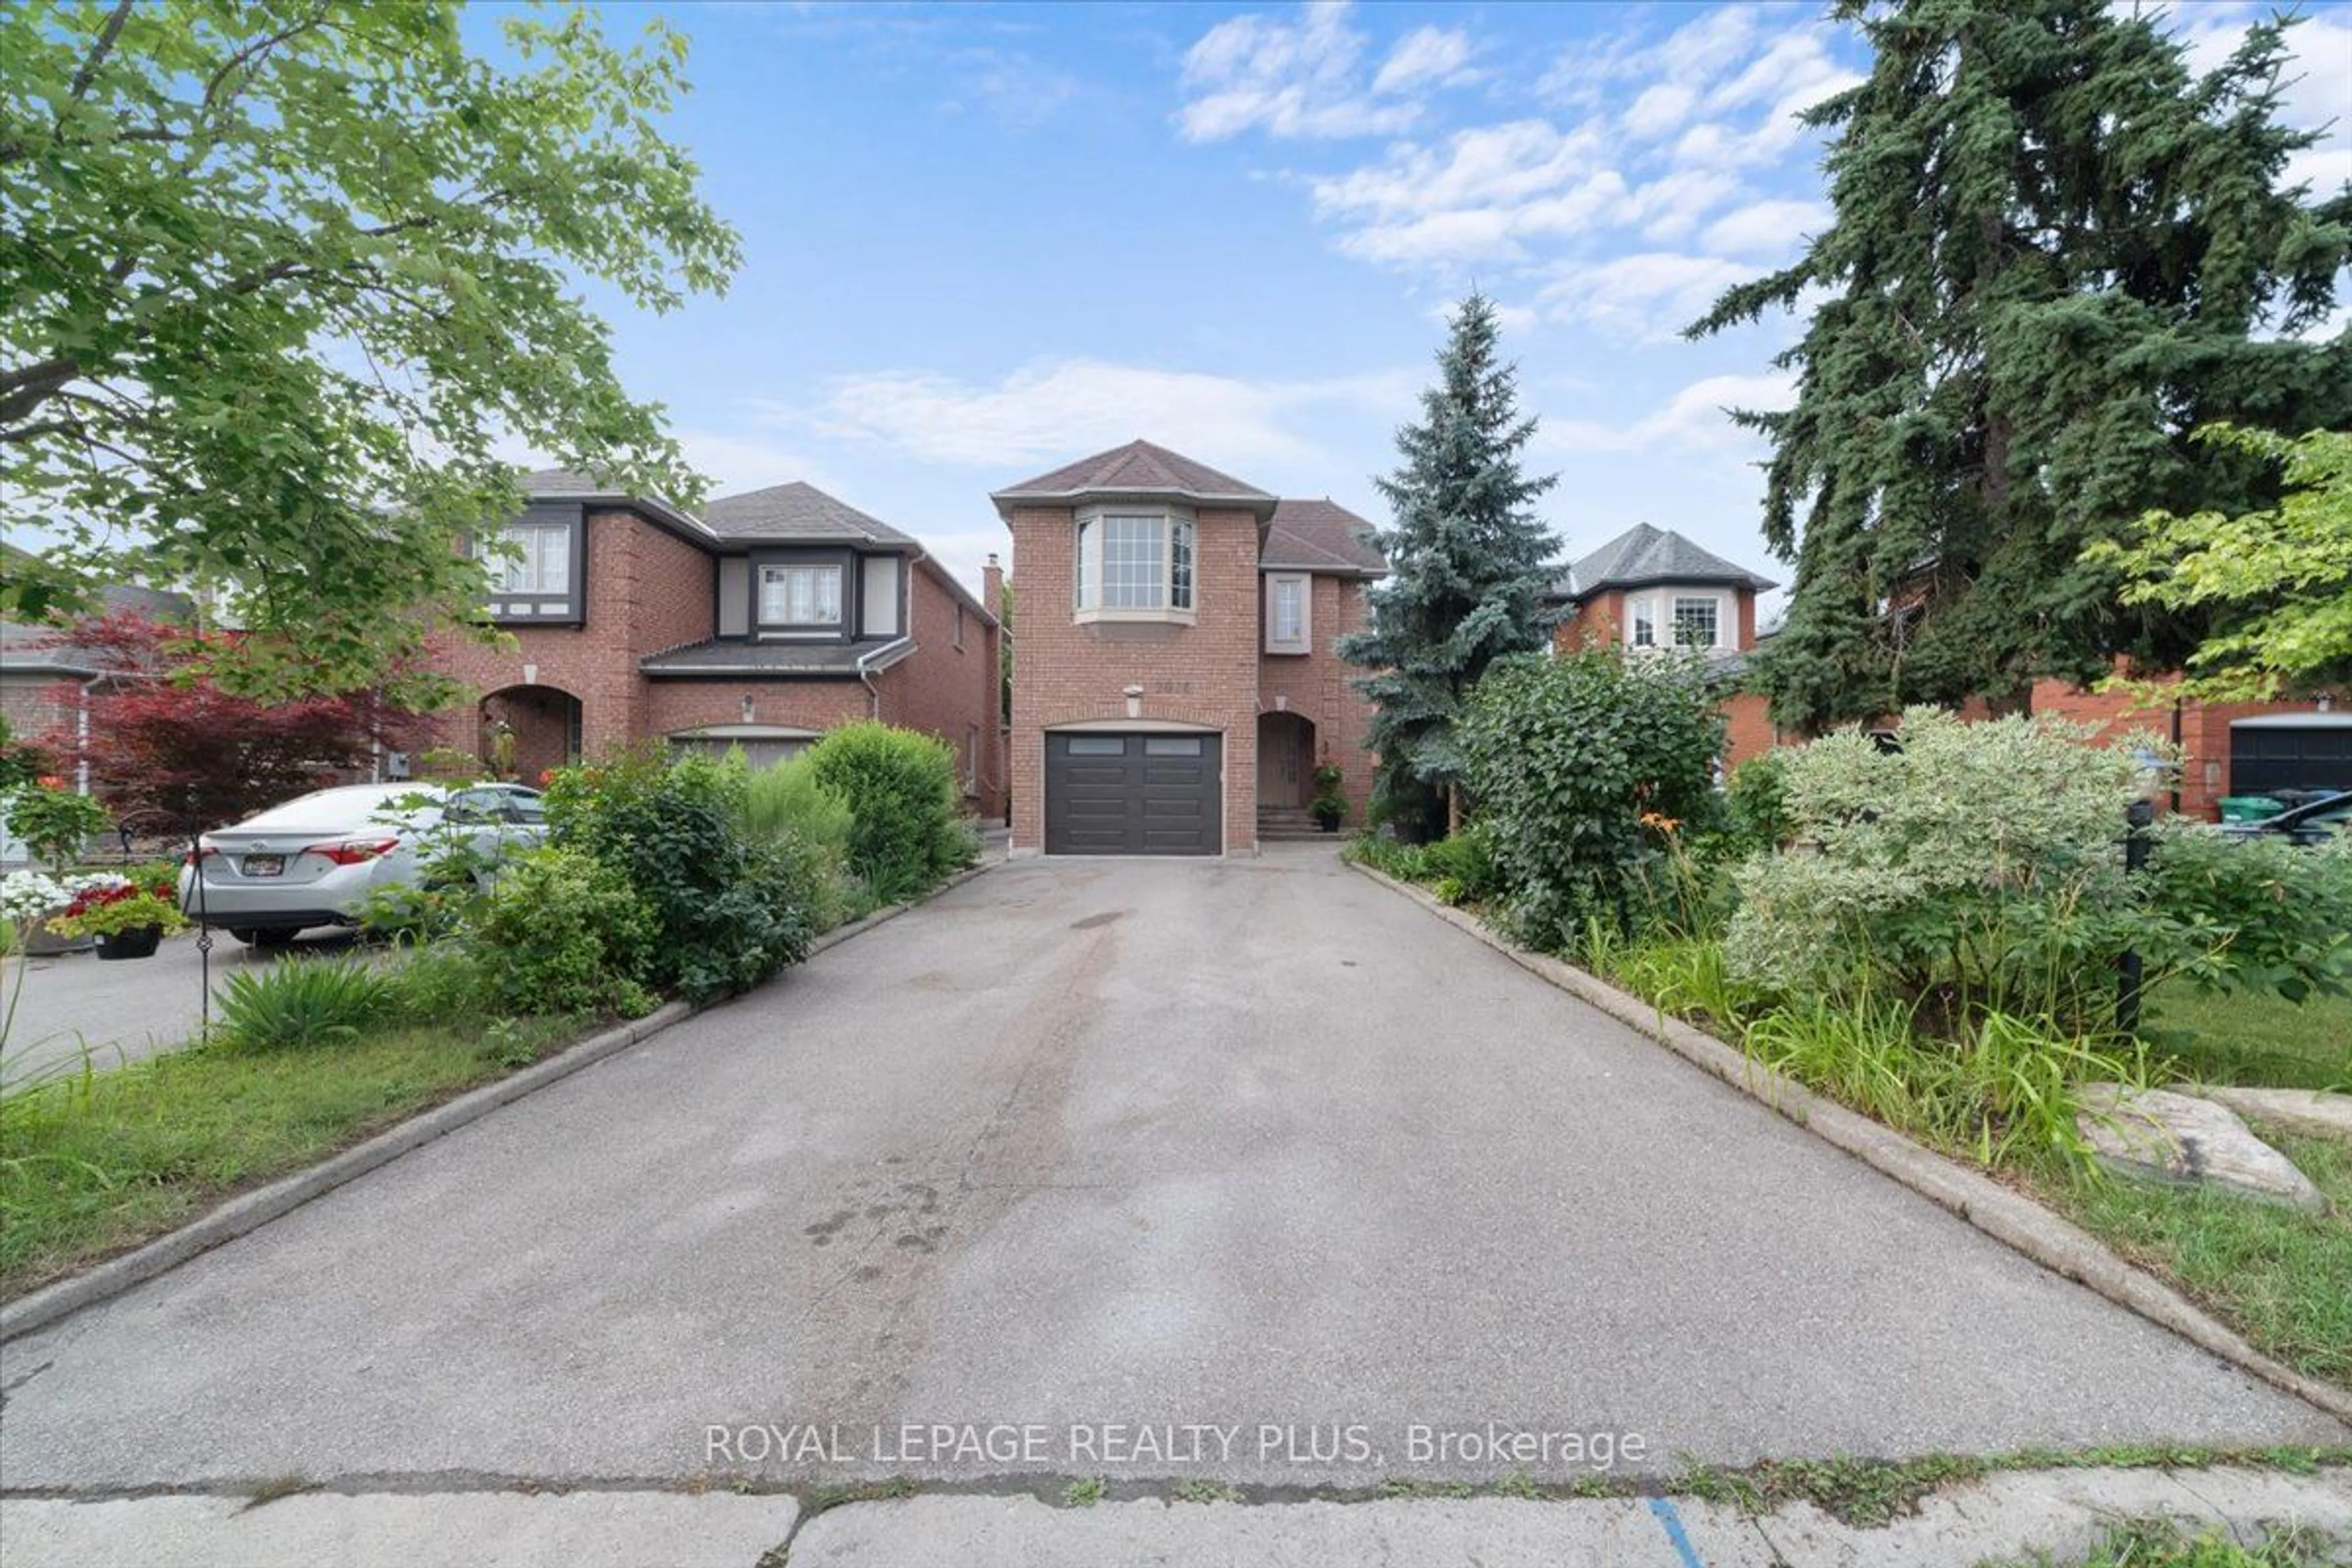 Frontside or backside of a home for 2906 Gulfstream Way, Mississauga Ontario L5N 6K3